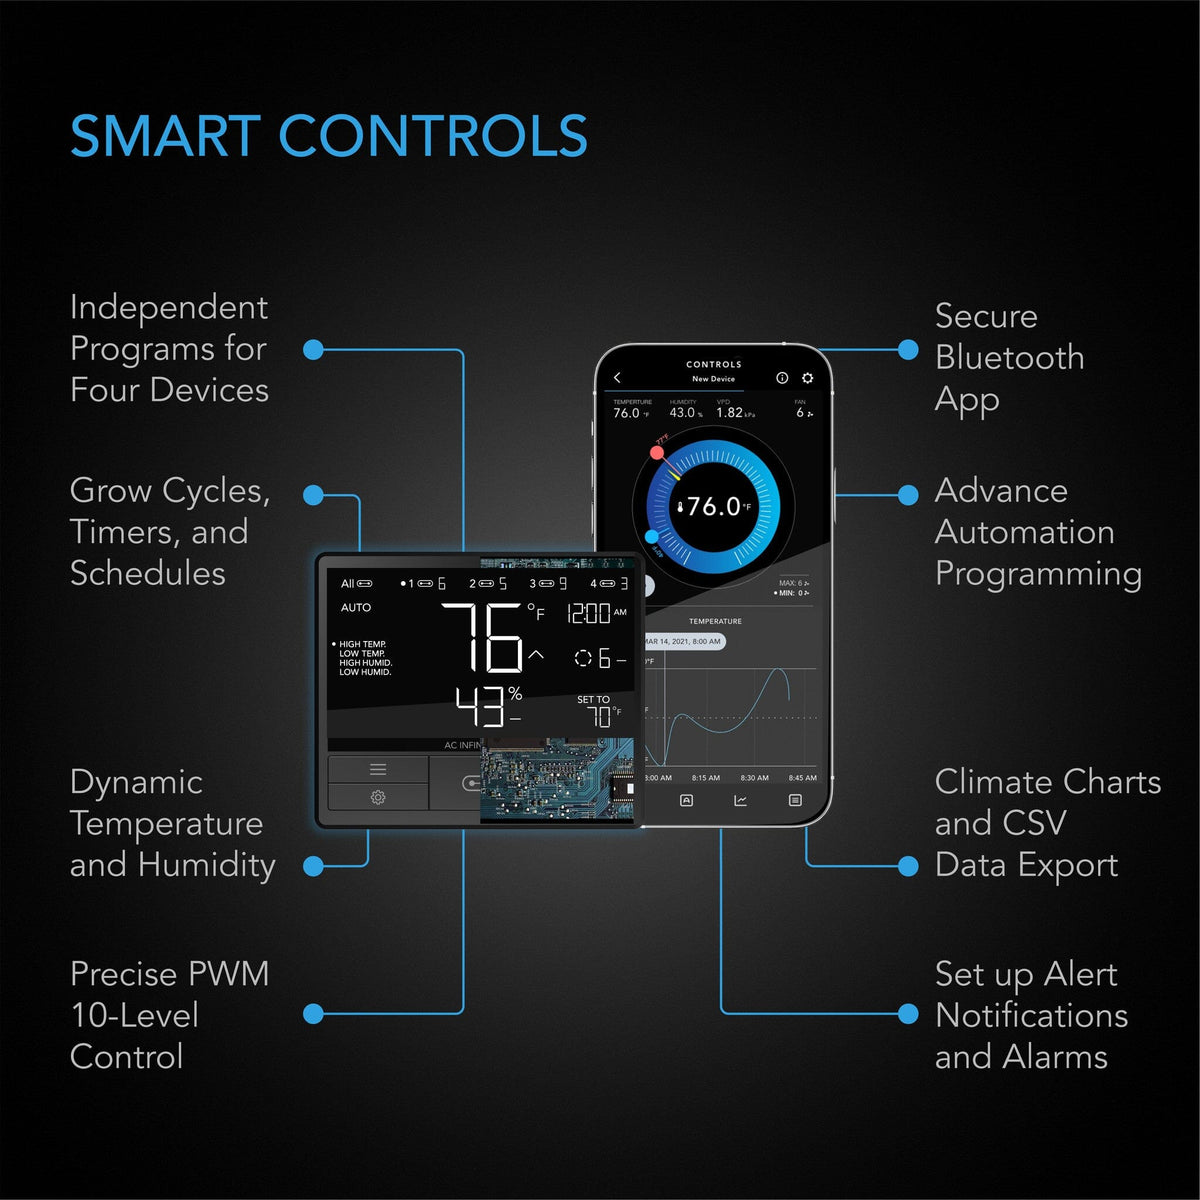 Smart Controls wifi and Bluetooth